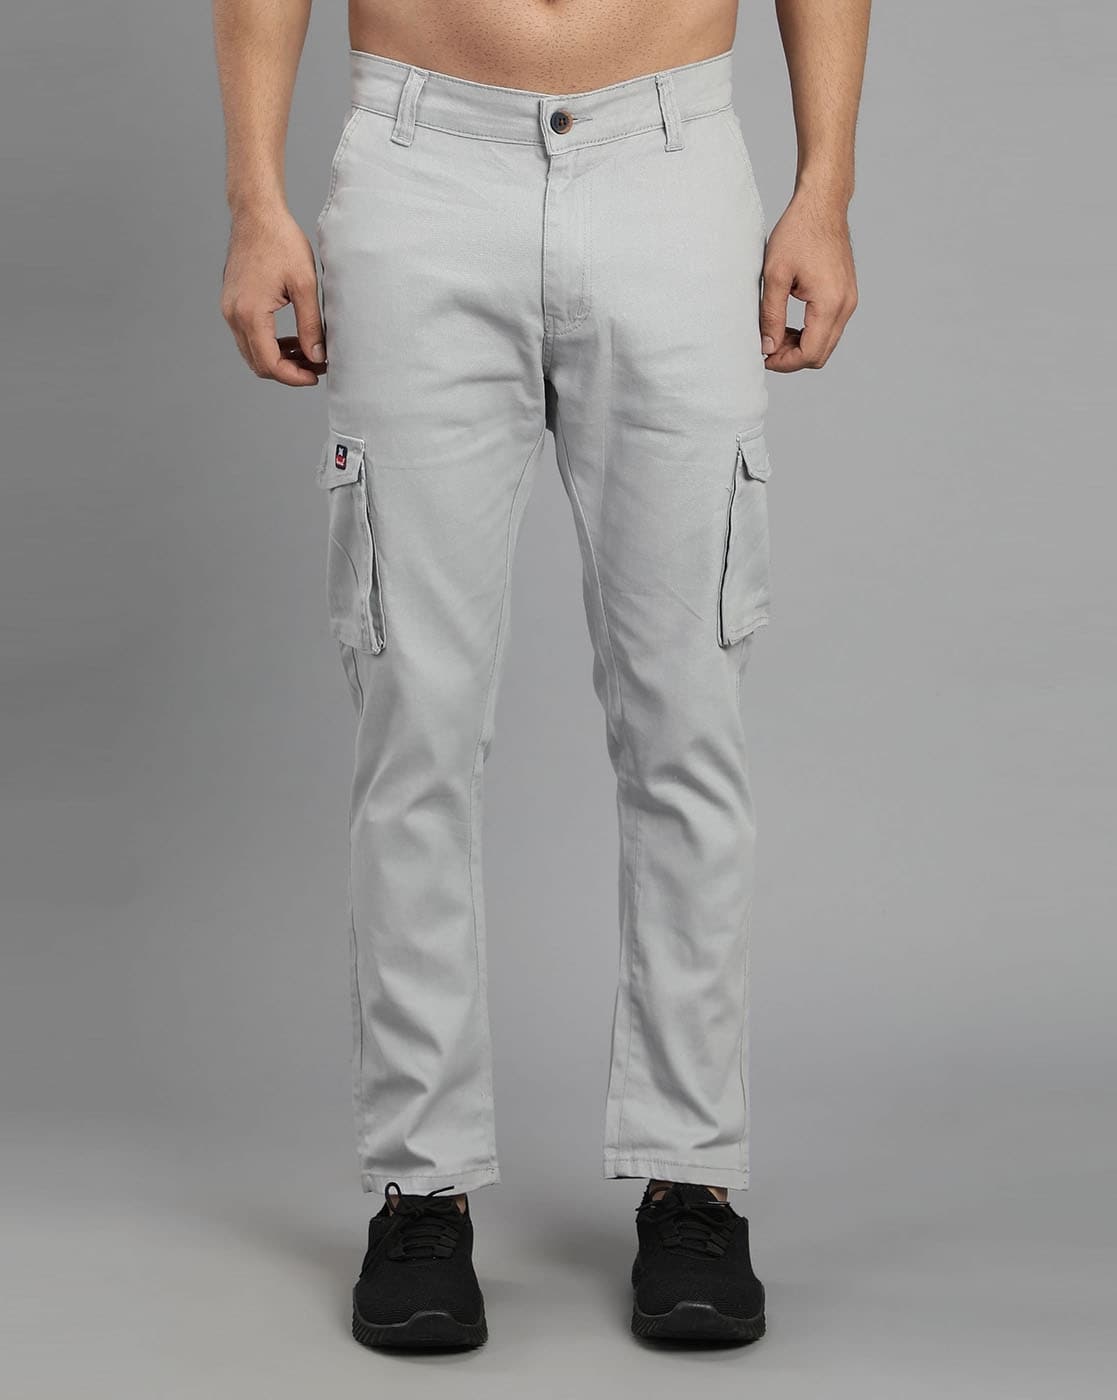 Buy OffWhite Trousers  Pants for Men by G STAR RAW Online  Ajiocom